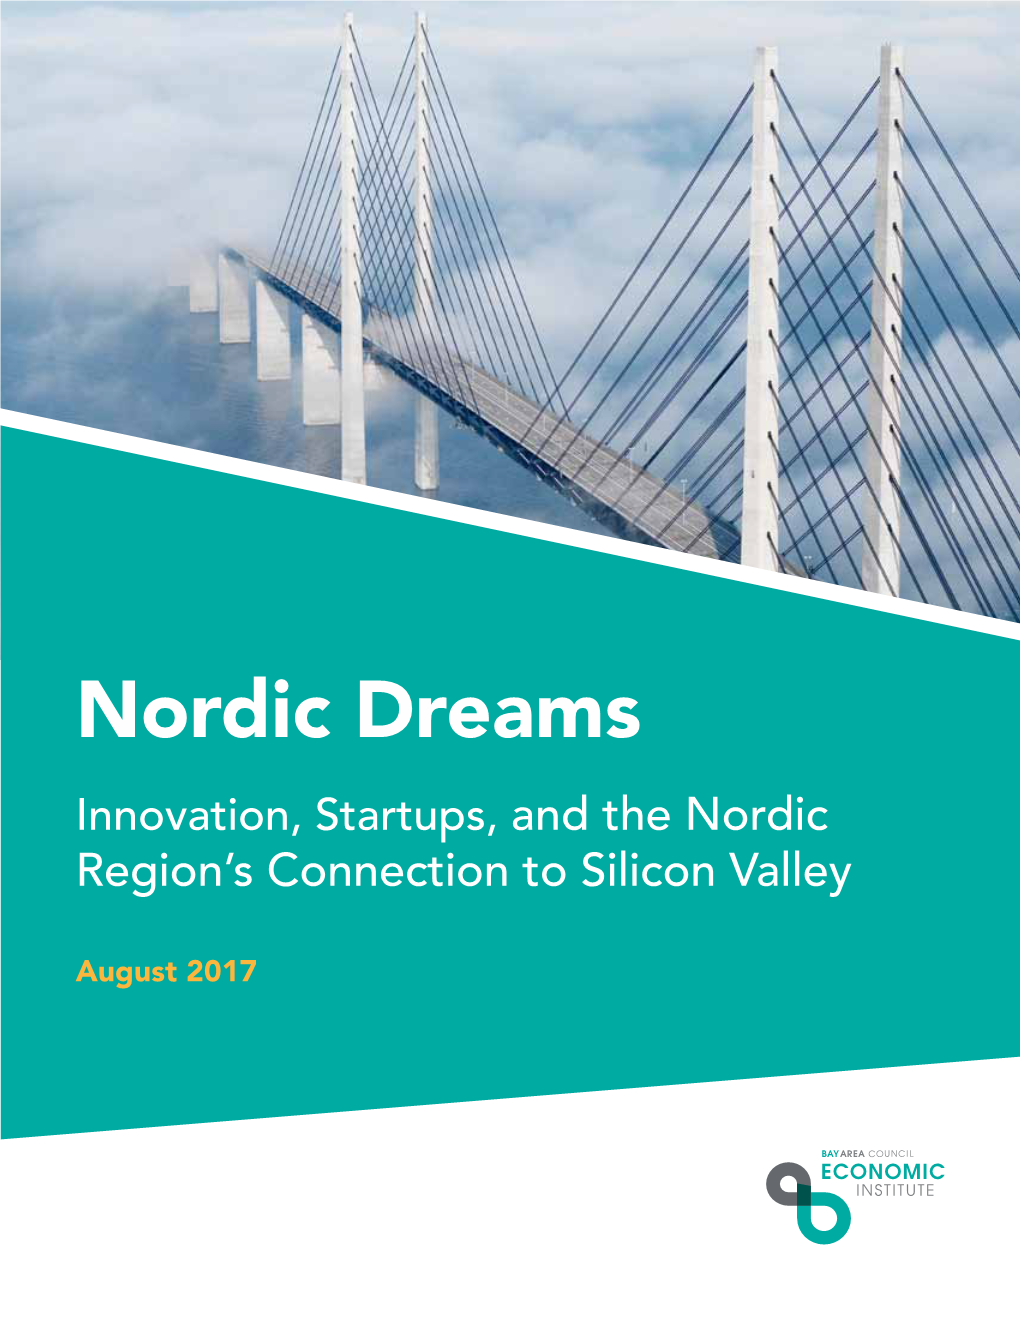 Read the Full Report on Nordic Dreams: Innovation, Startups, And